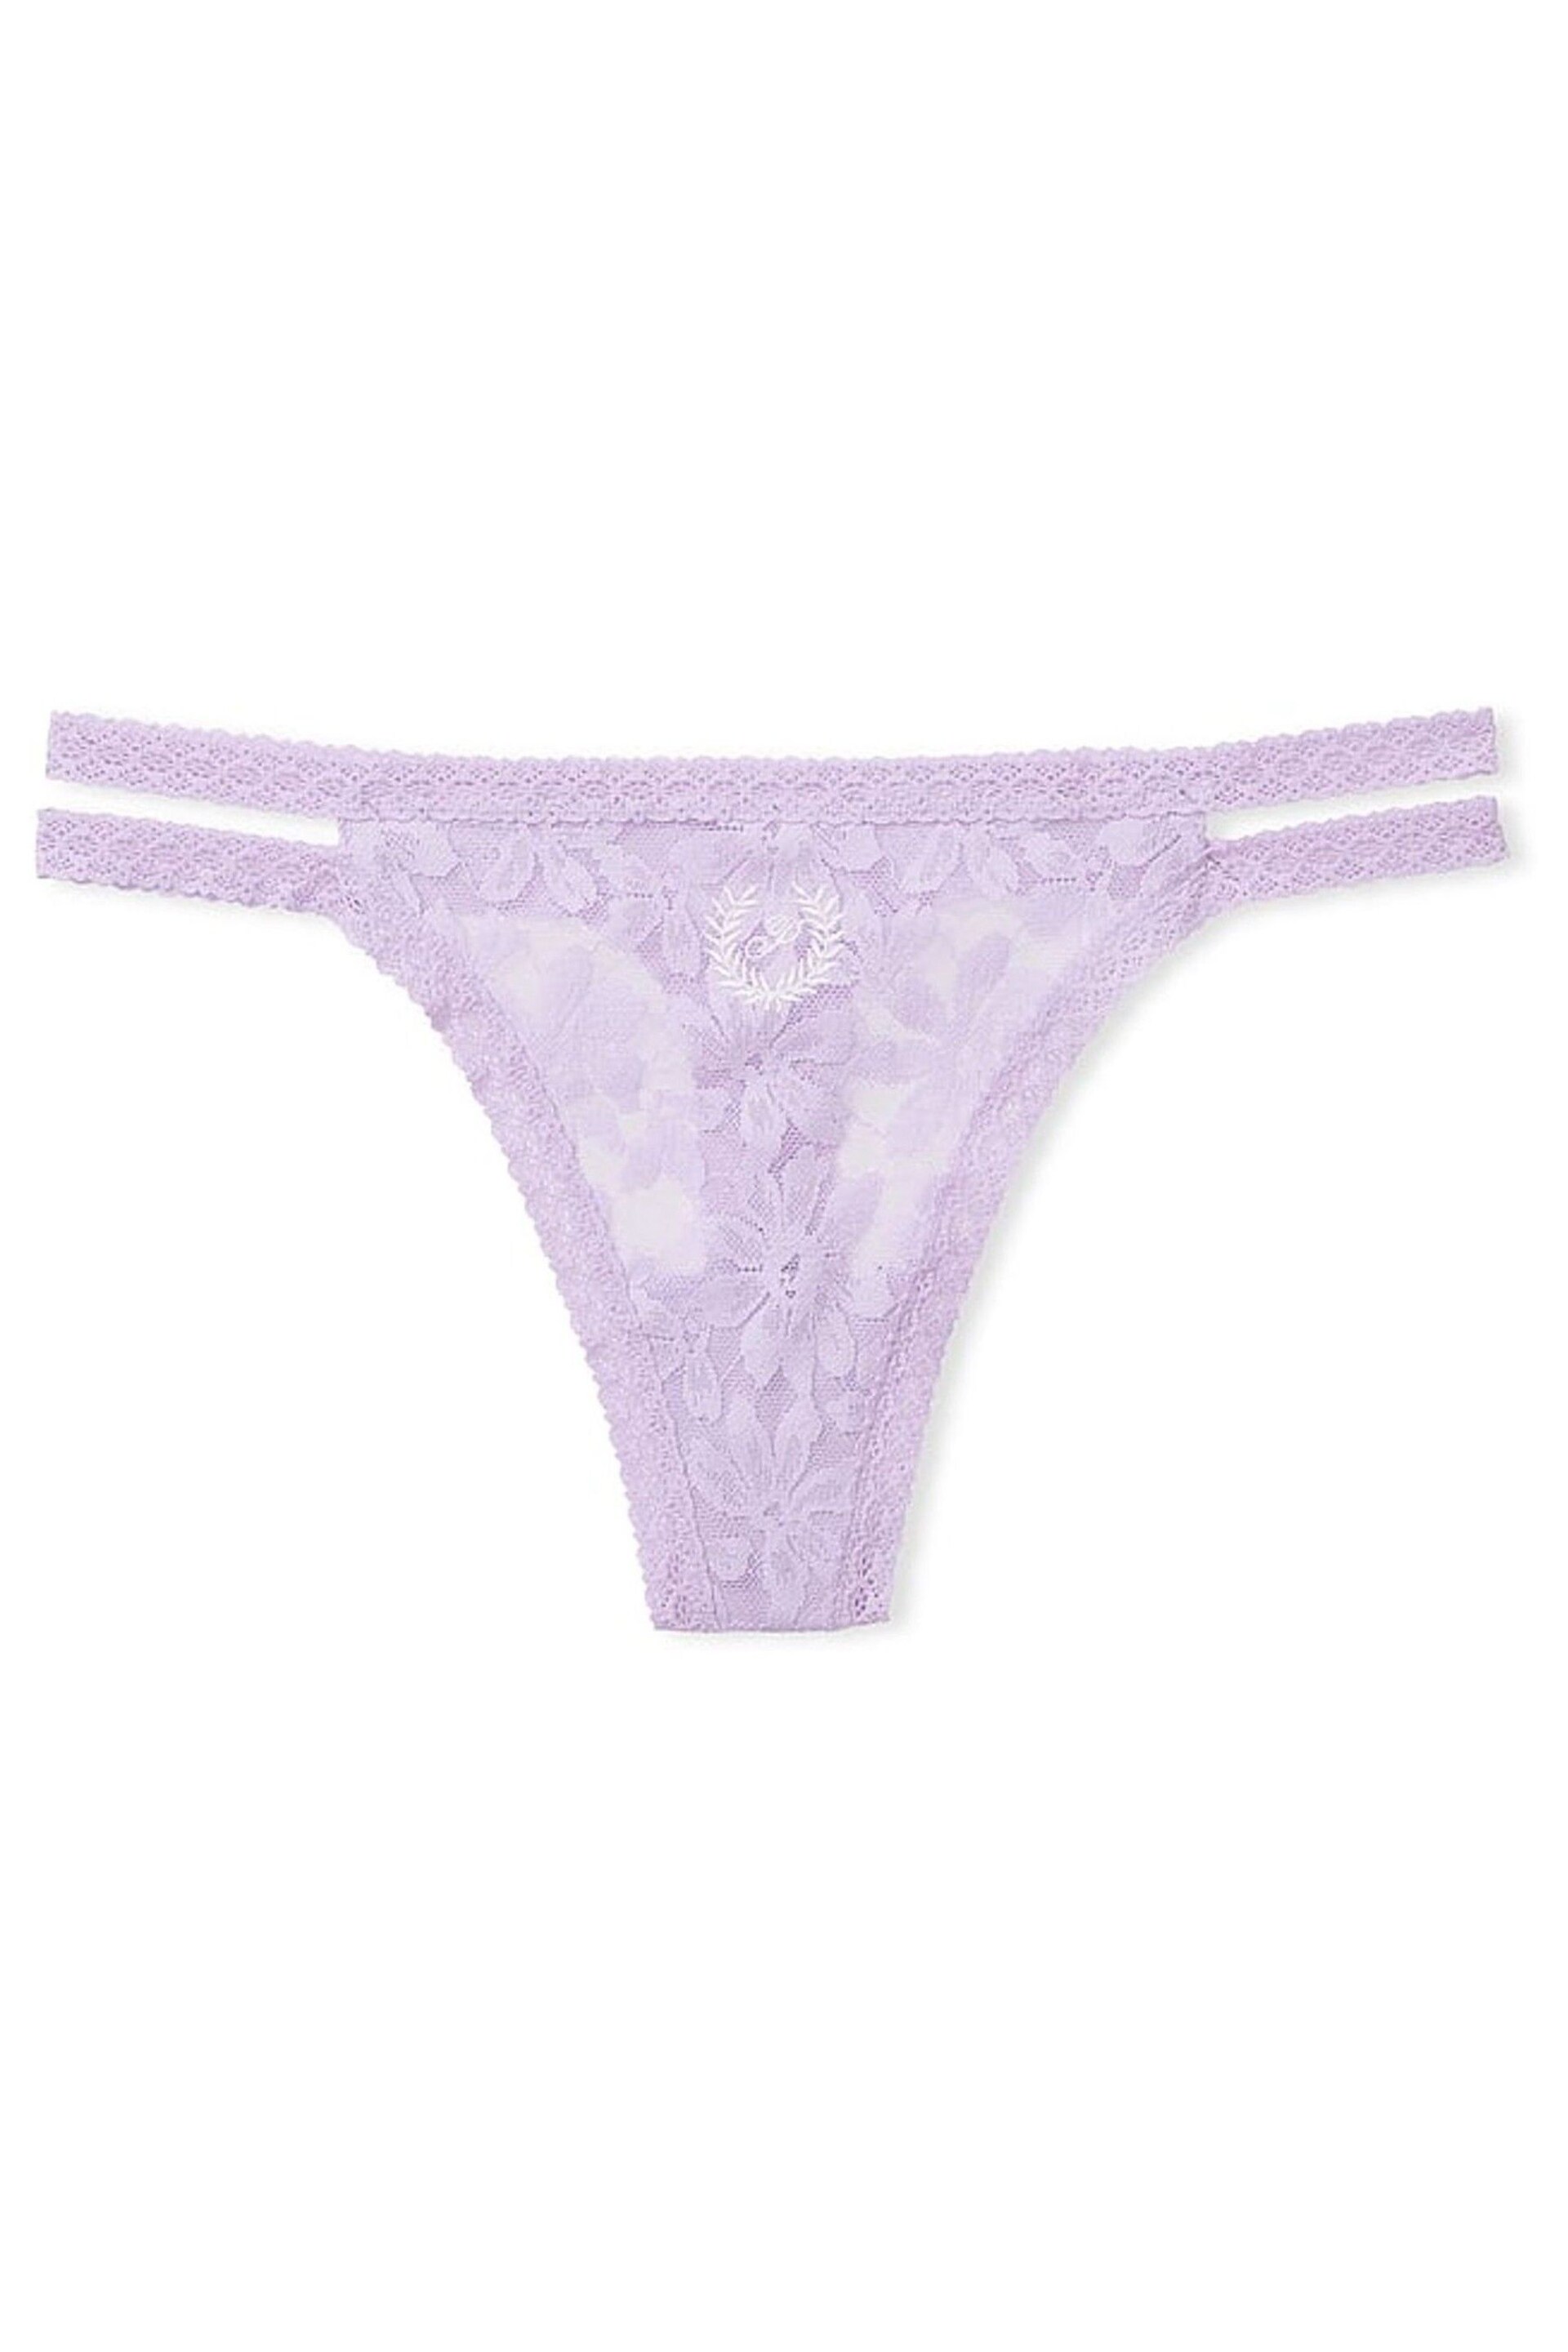 Victoria's Secret PINK Pastel Lilac Purple Crest Lace Strappy Thong Knickers - Image 3 of 3